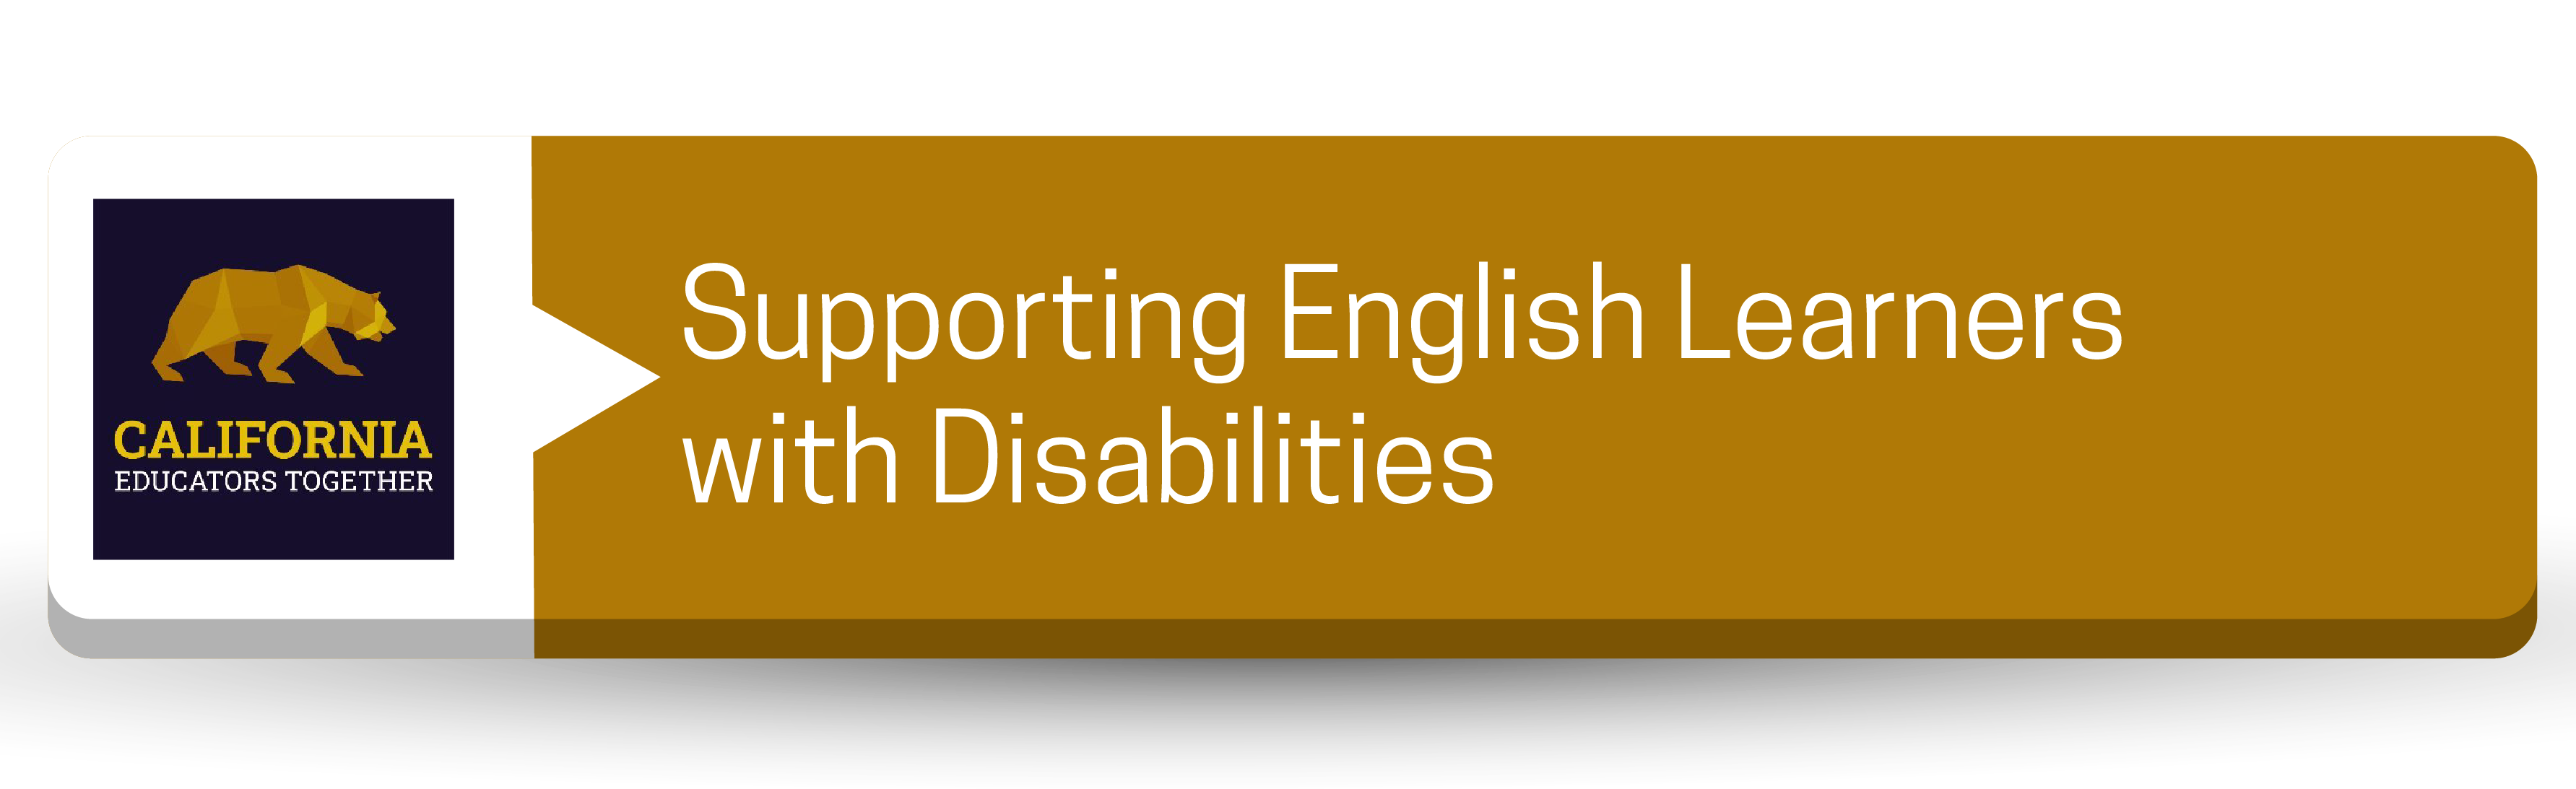 Supporting English Learners with Disabilities - Practitioner Resource (CA Educators Together) Button